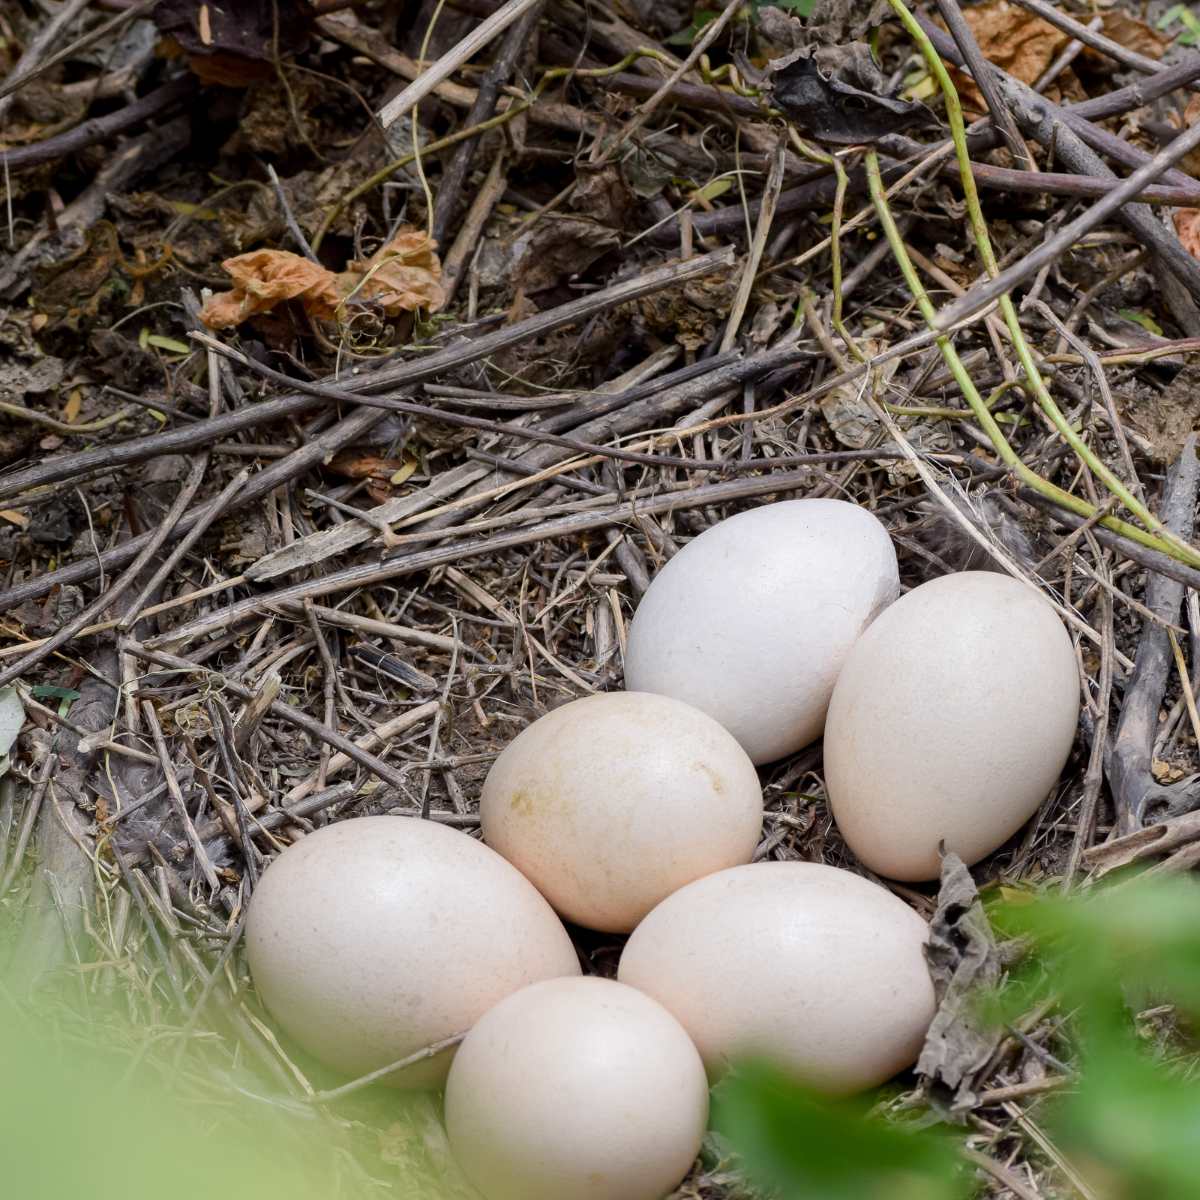 Six peacock eggs in a nest.